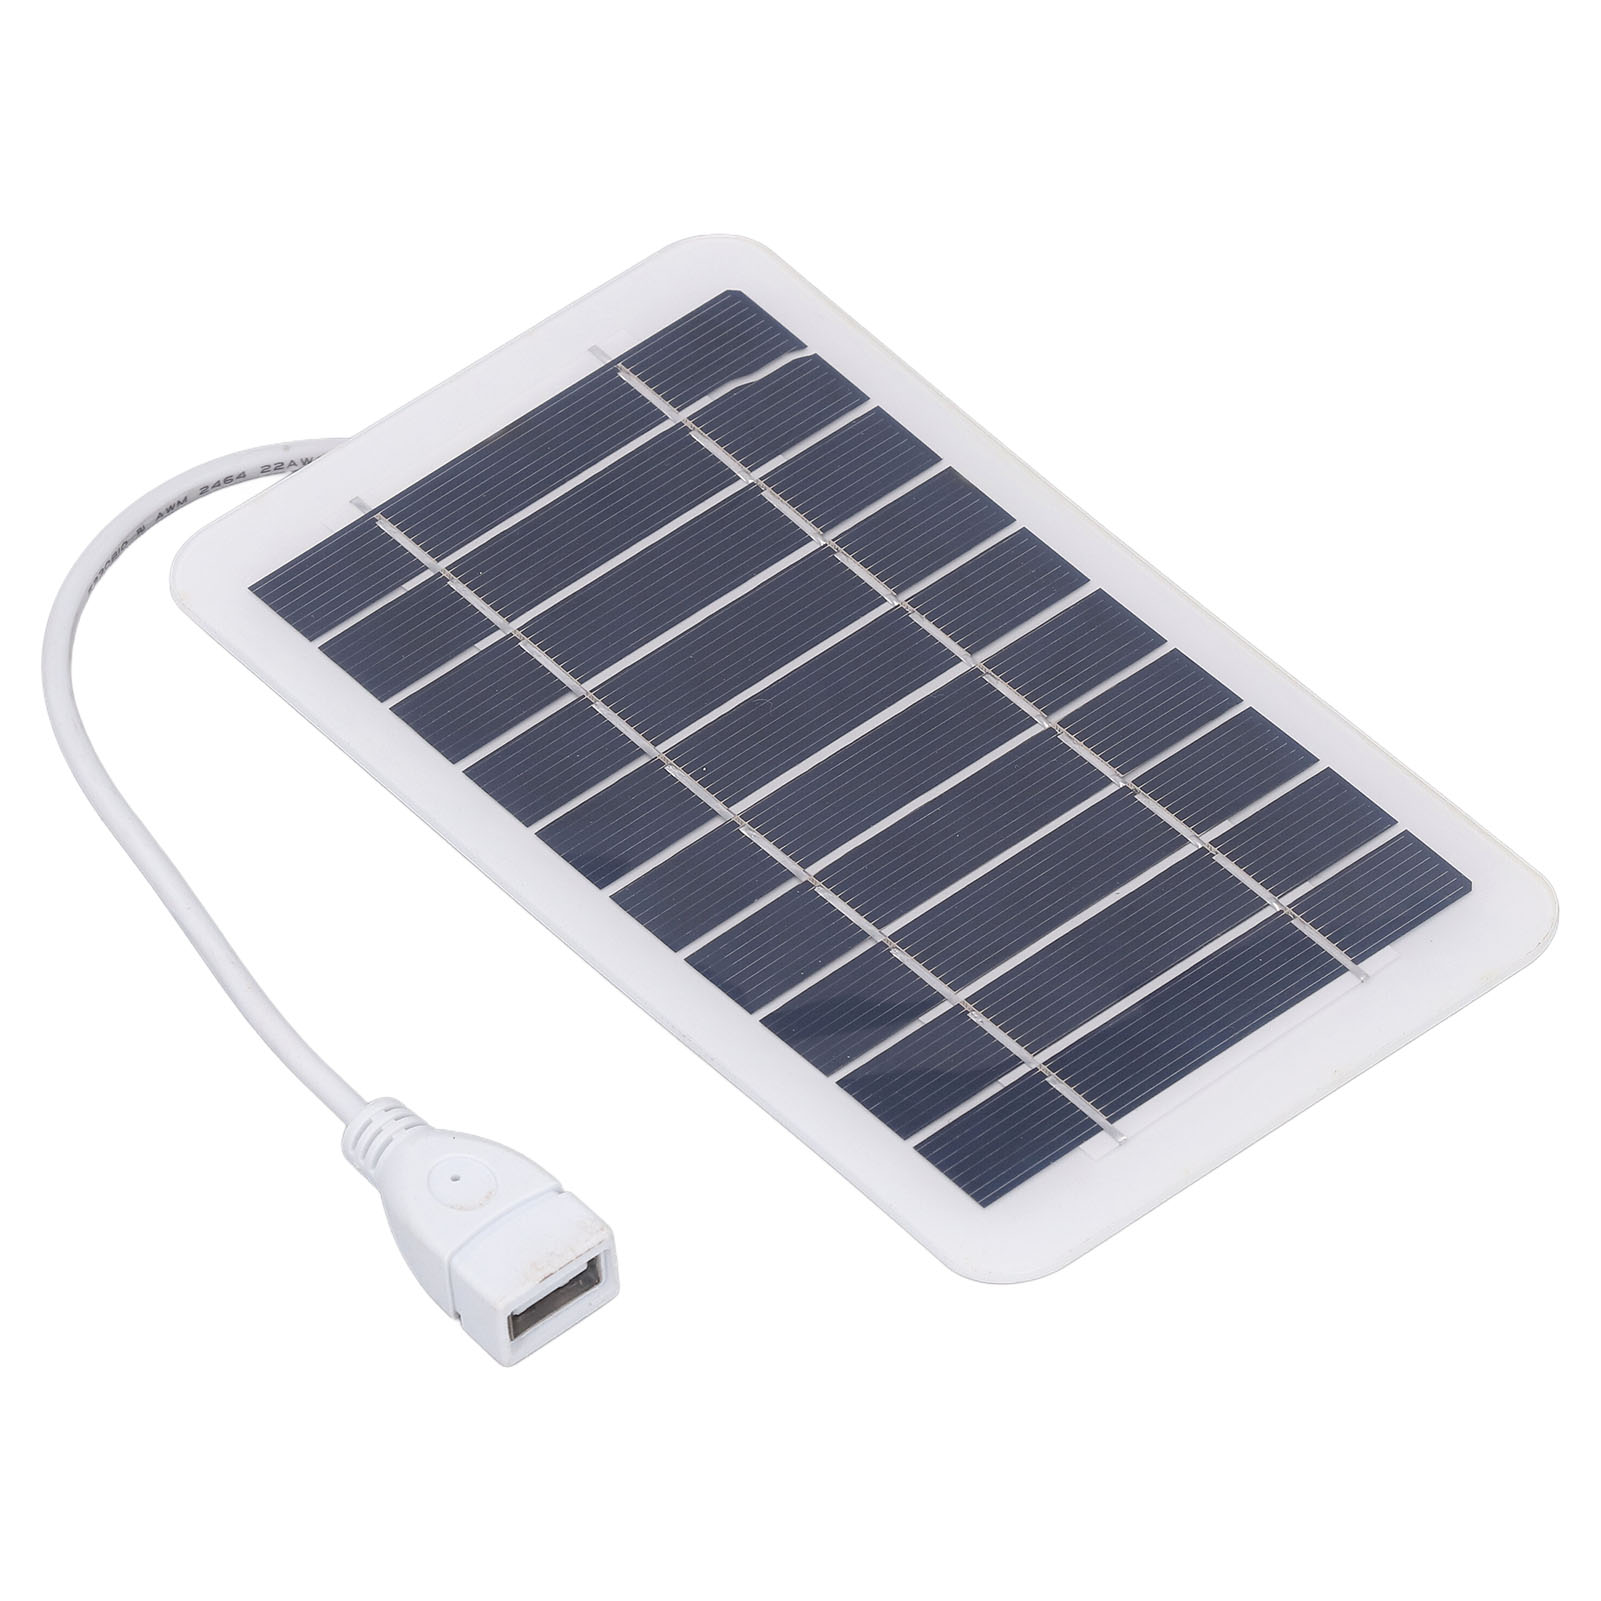 Solar Panel Portable Outdoor Solar Panel Charger for Camera Cell Phone ...